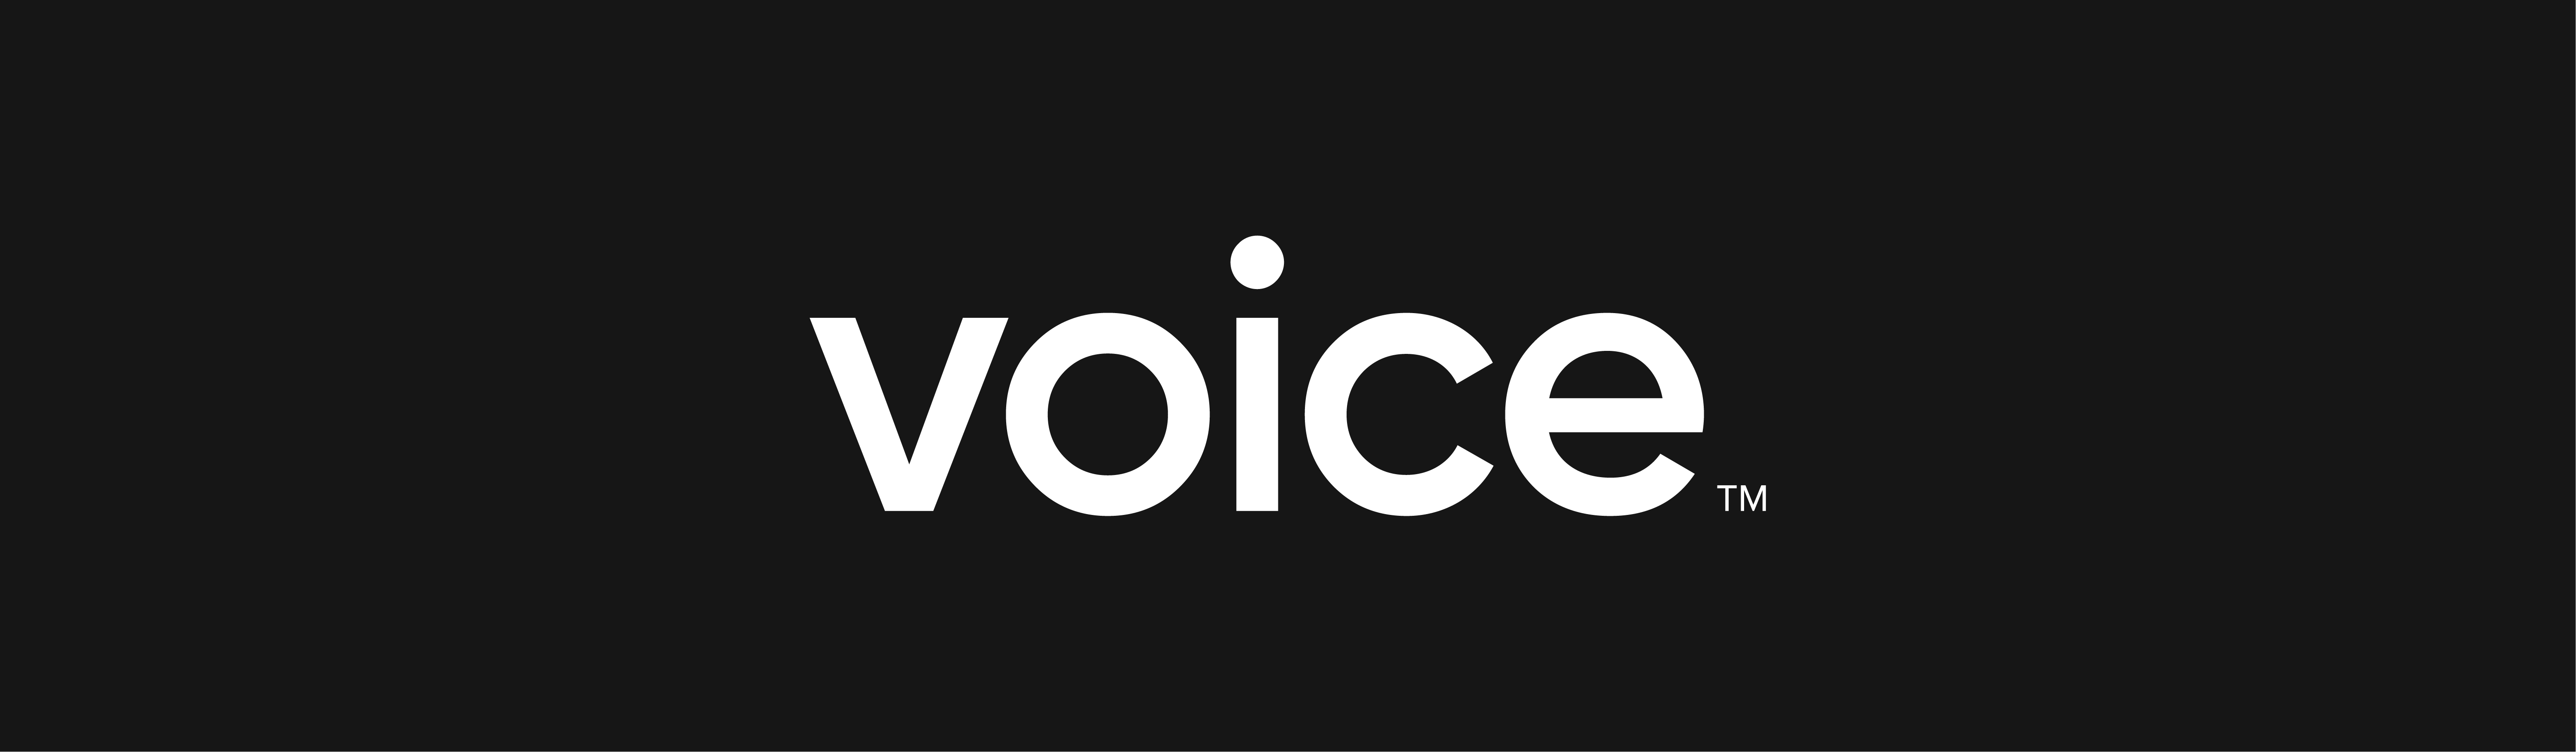 Why choose Voice?